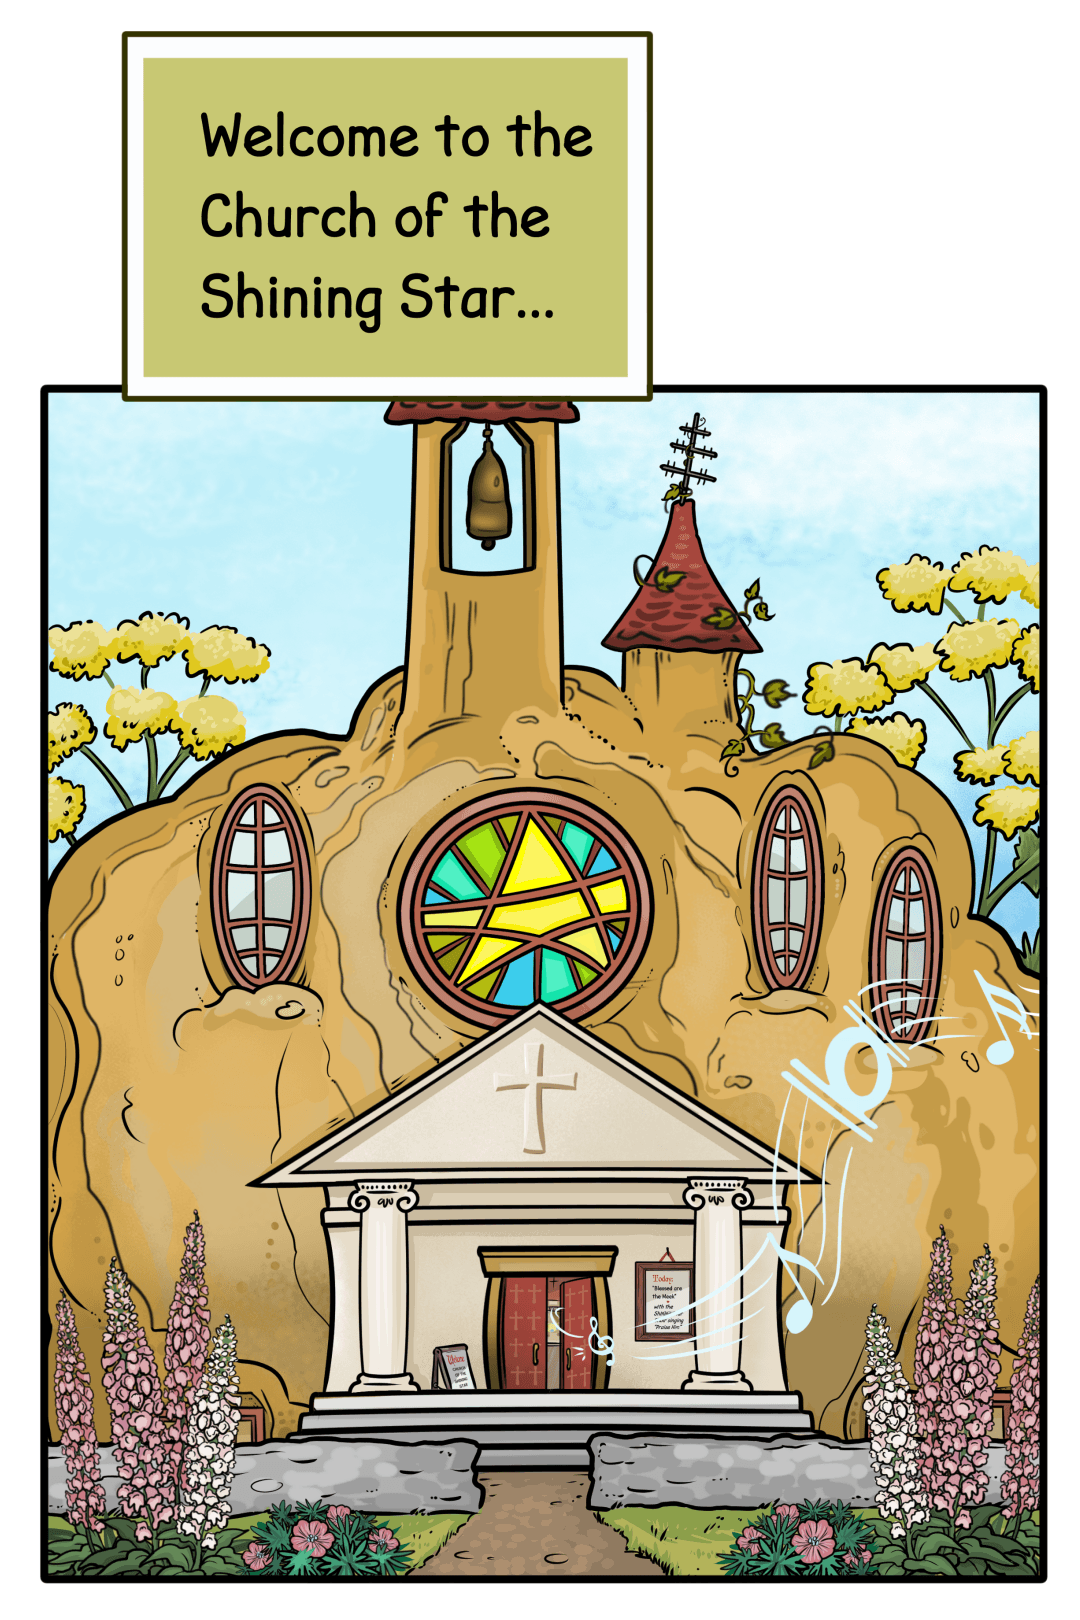 Church of the Shining Star image number 0